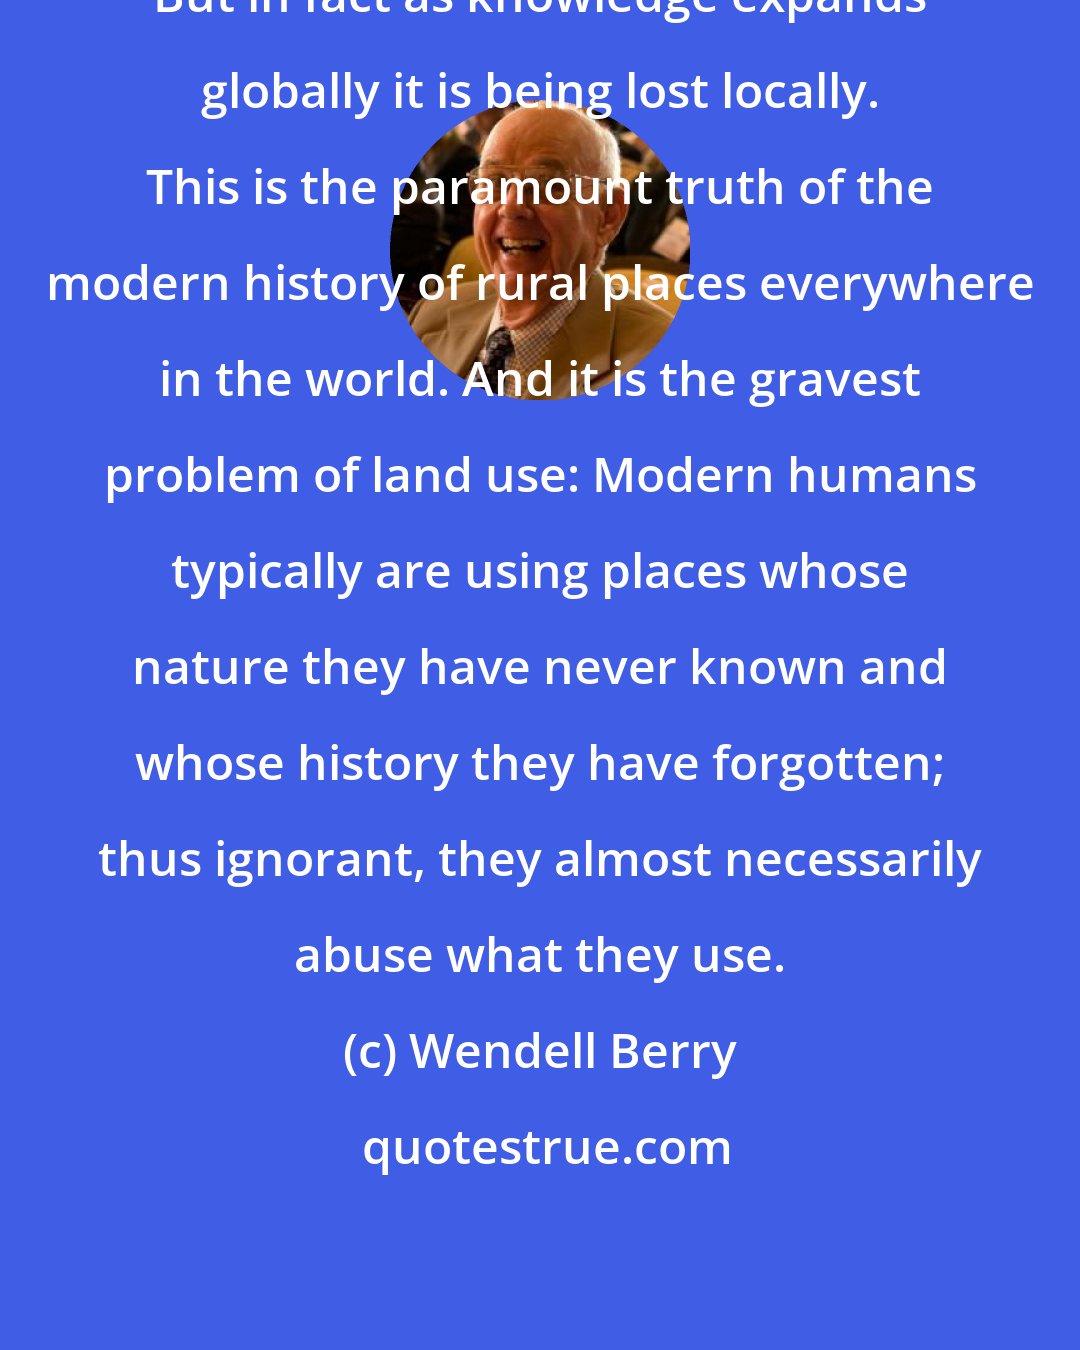 Wendell Berry: But in fact as knowledge expands globally it is being lost locally. This is the paramount truth of the modern history of rural places everywhere in the world. And it is the gravest problem of land use: Modern humans typically are using places whose nature they have never known and whose history they have forgotten; thus ignorant, they almost necessarily abuse what they use.